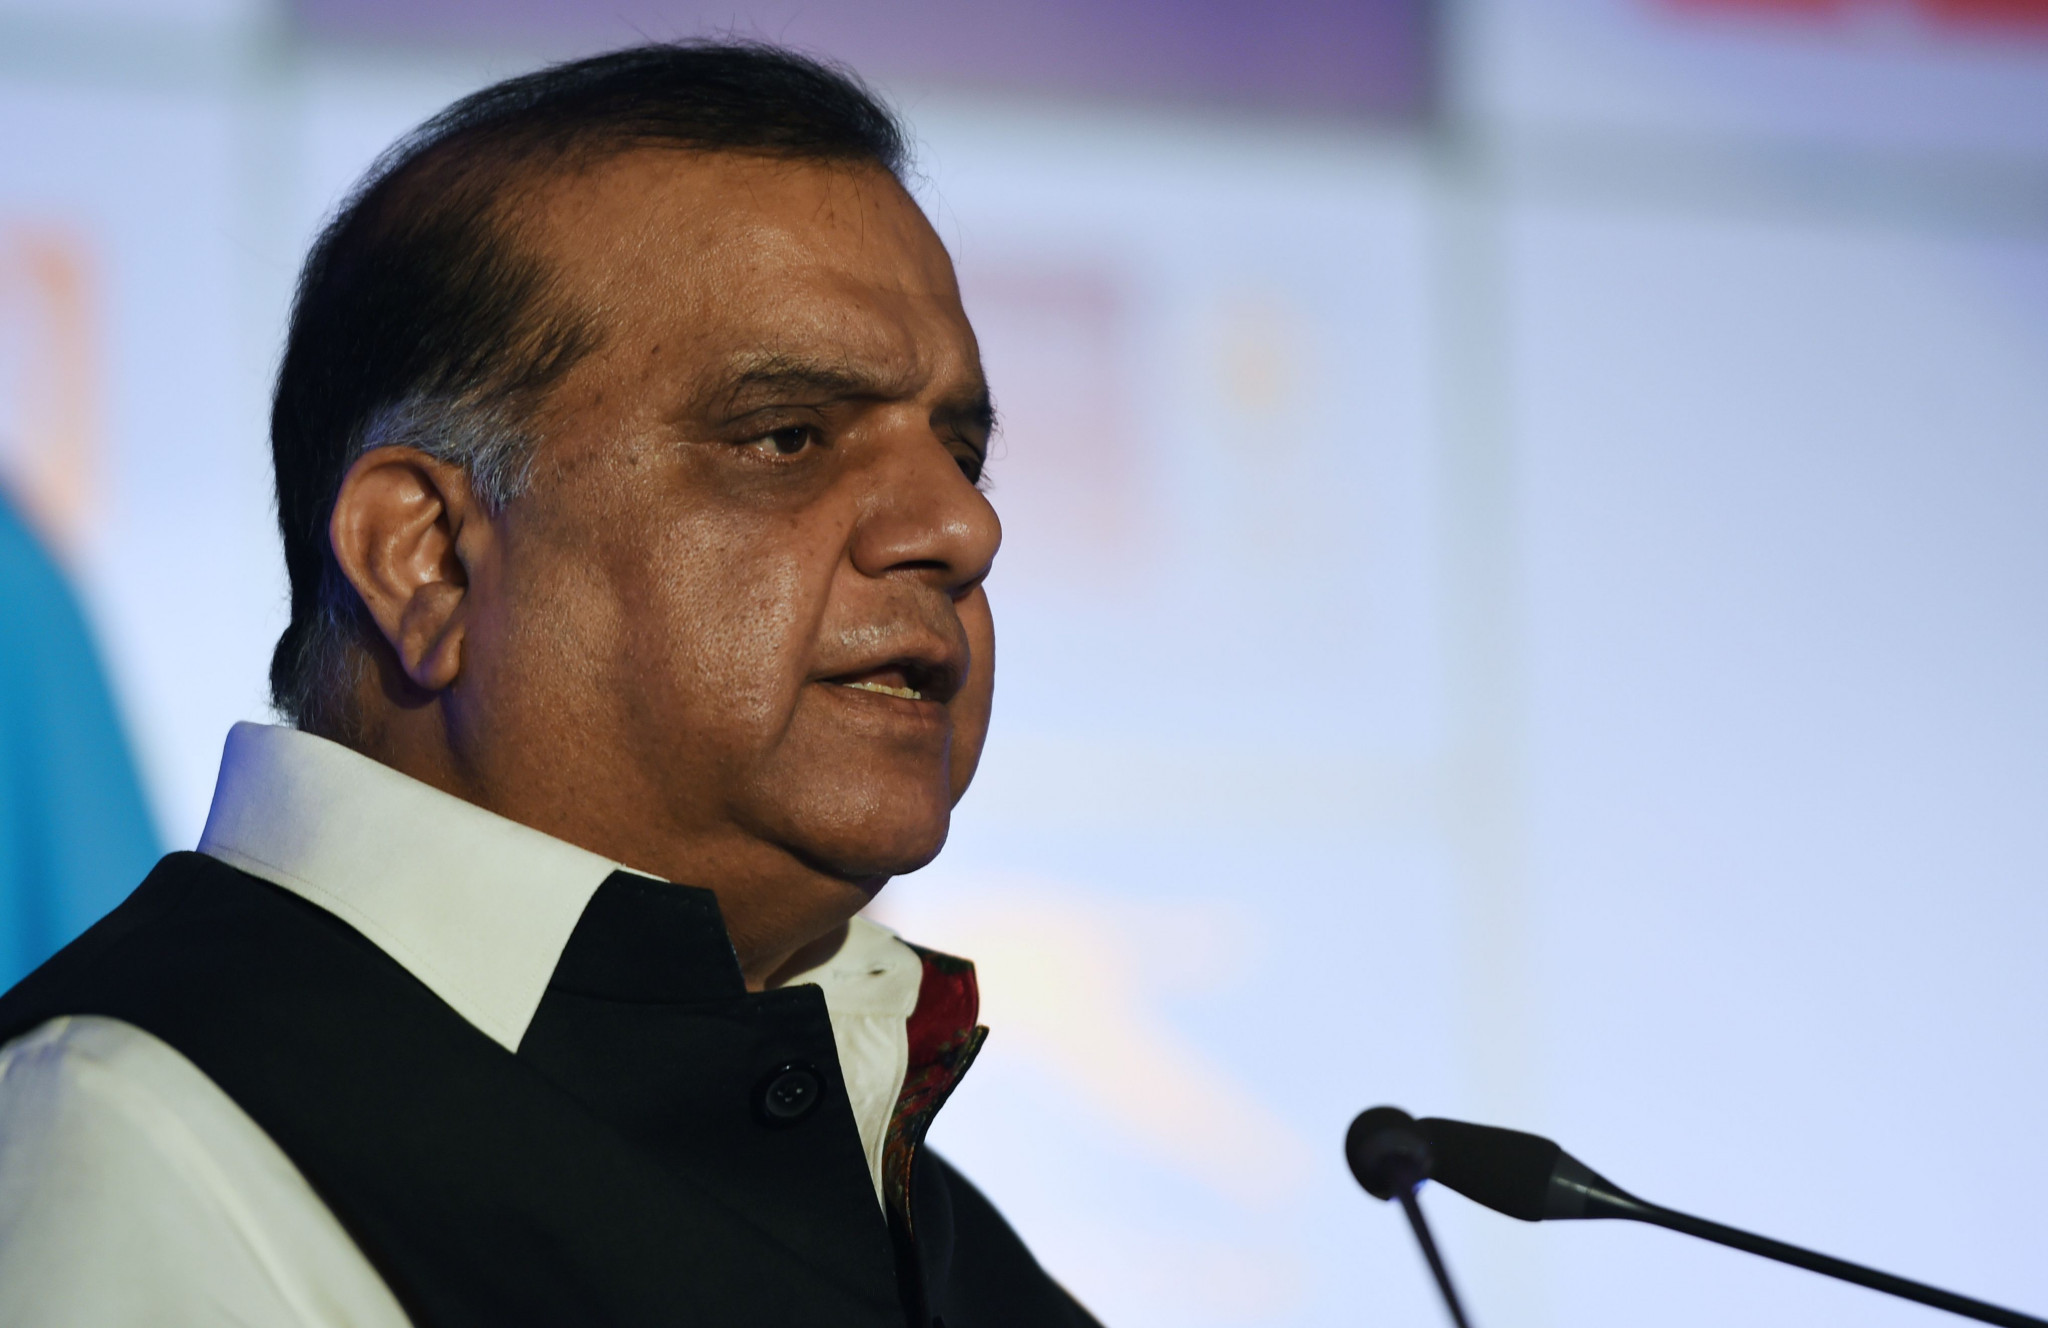 The IOA has been embroiled in a governance crisis which predates Narinder Batra quitting as President  ©Getty Images